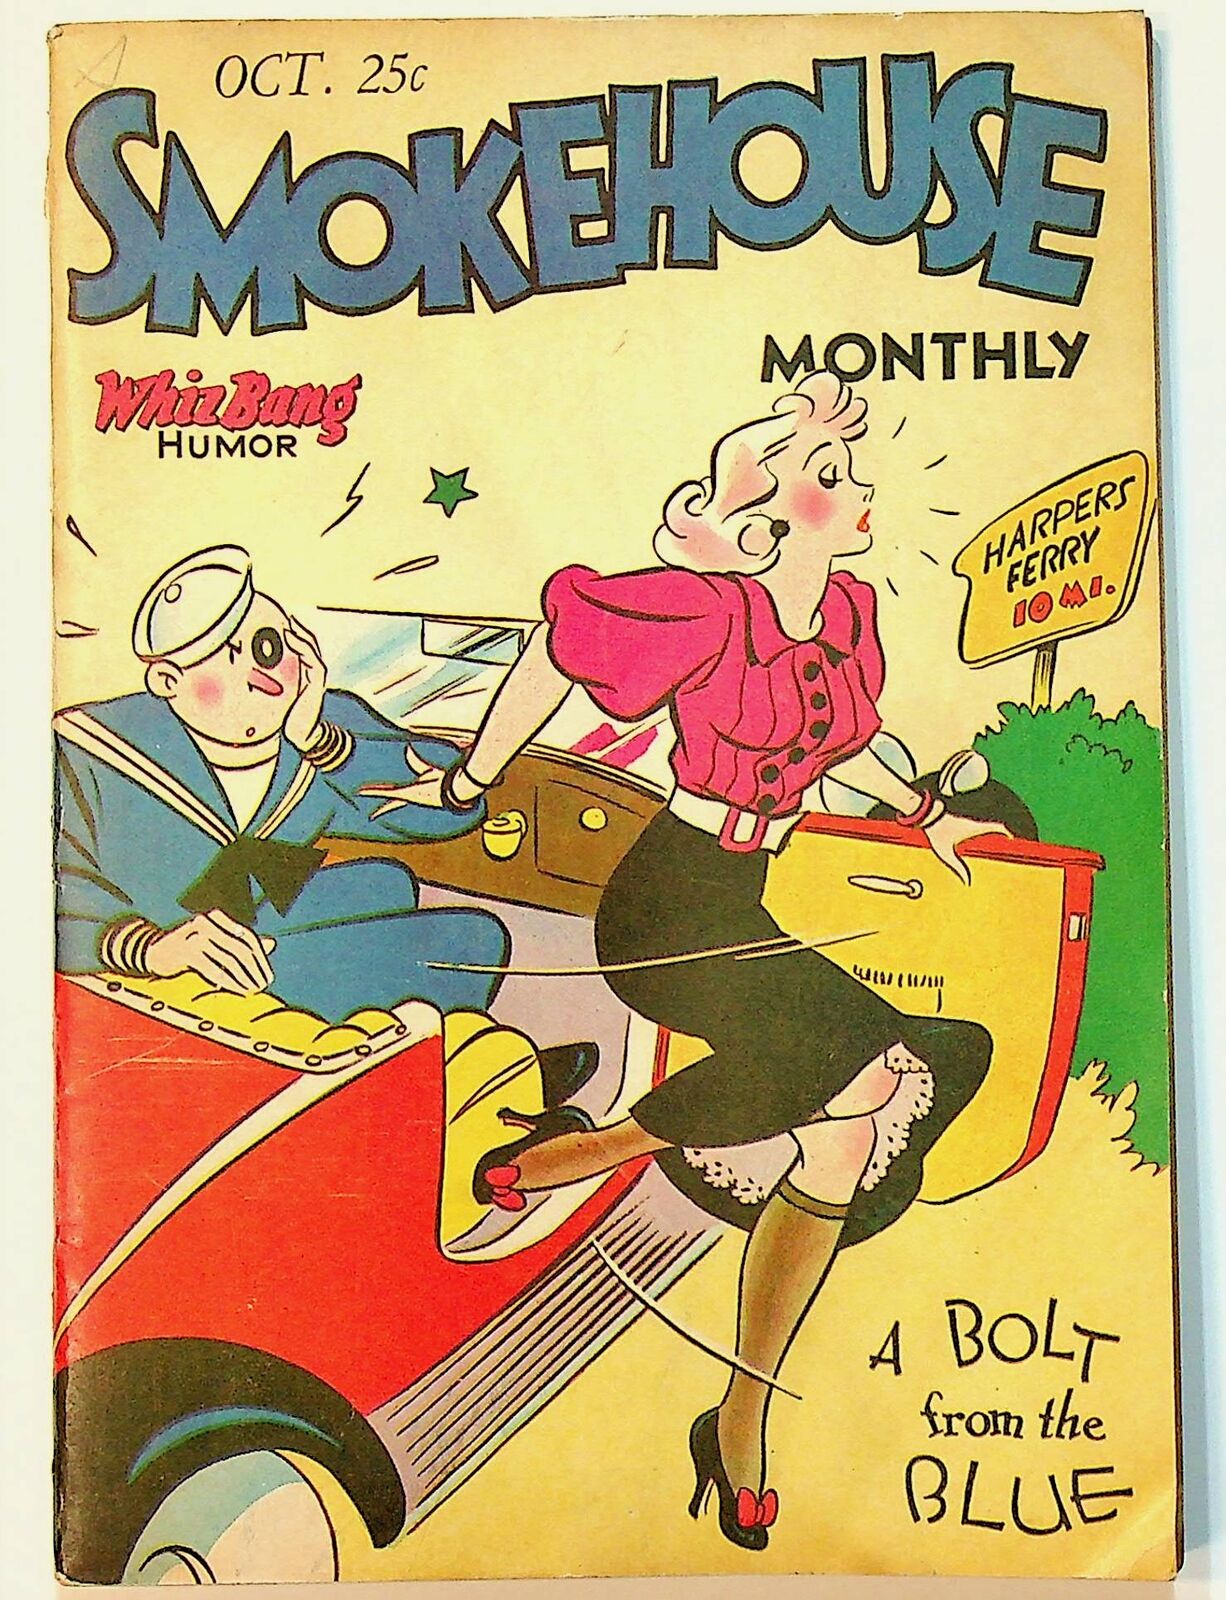 Smokehouse Monthly #106 VG 1936